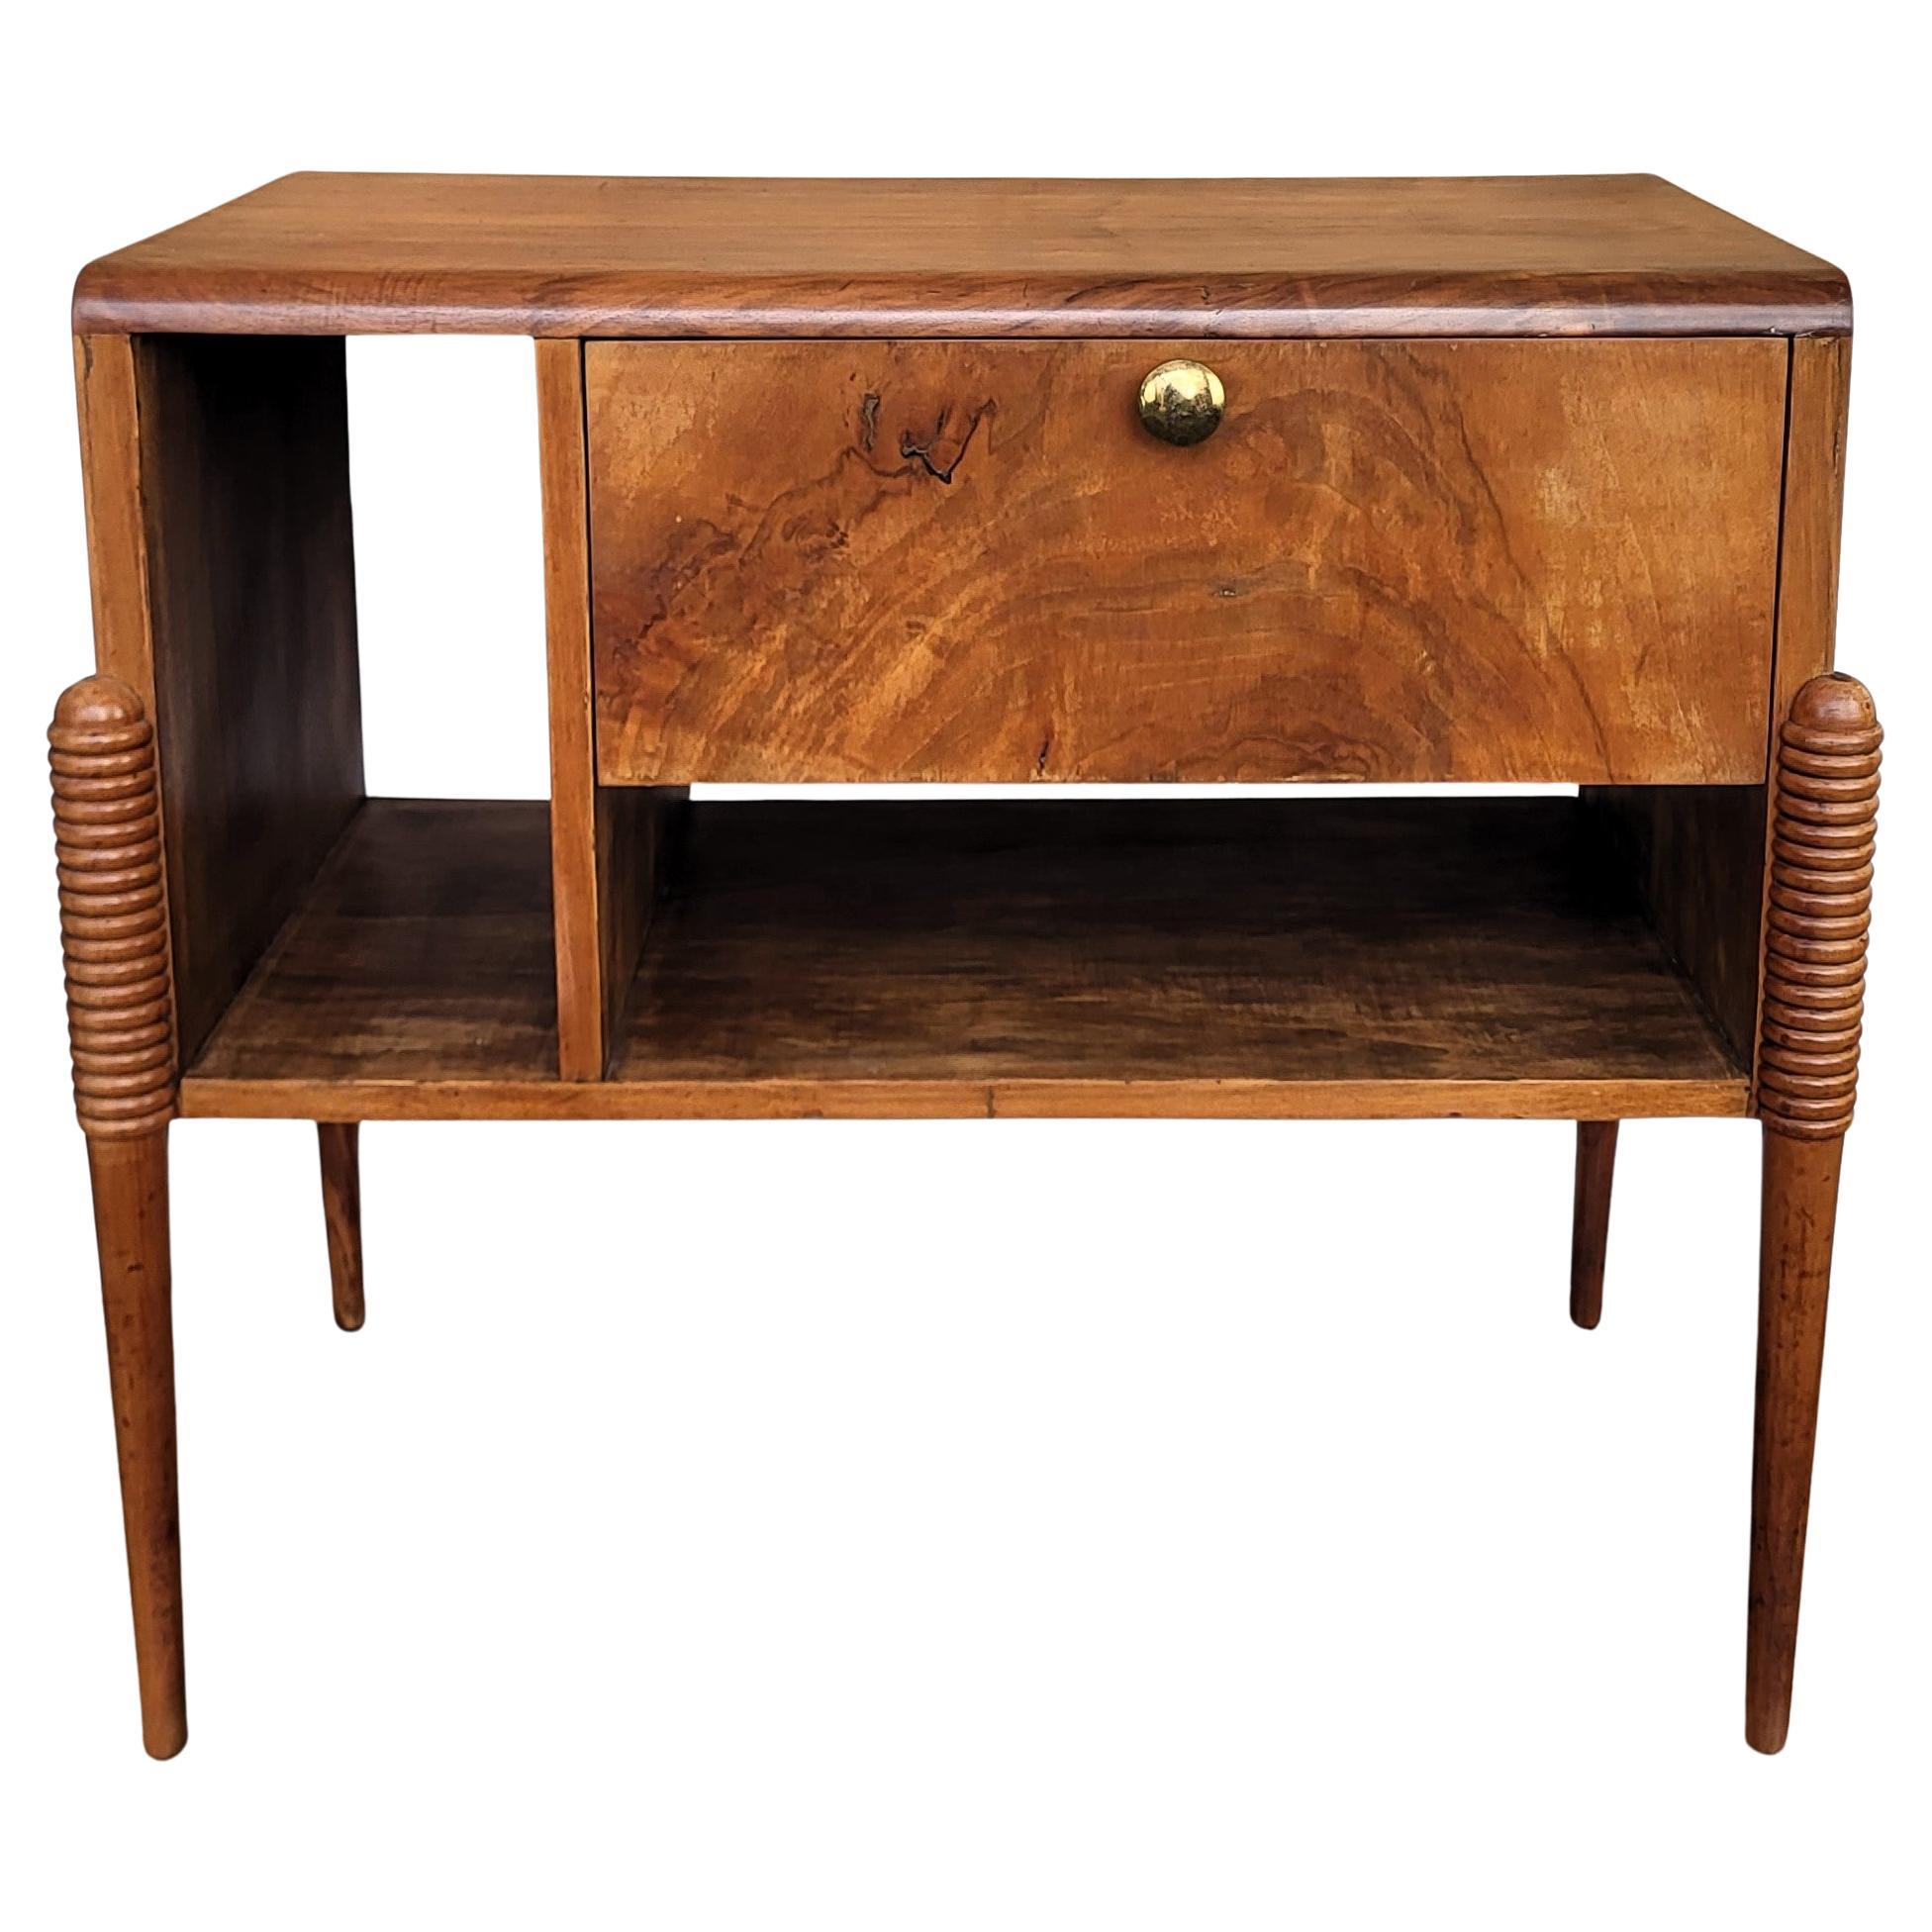 1960s Italian Mid-Century Modern Wood and Brass Dry Bar Drinks Cabinet For Sale